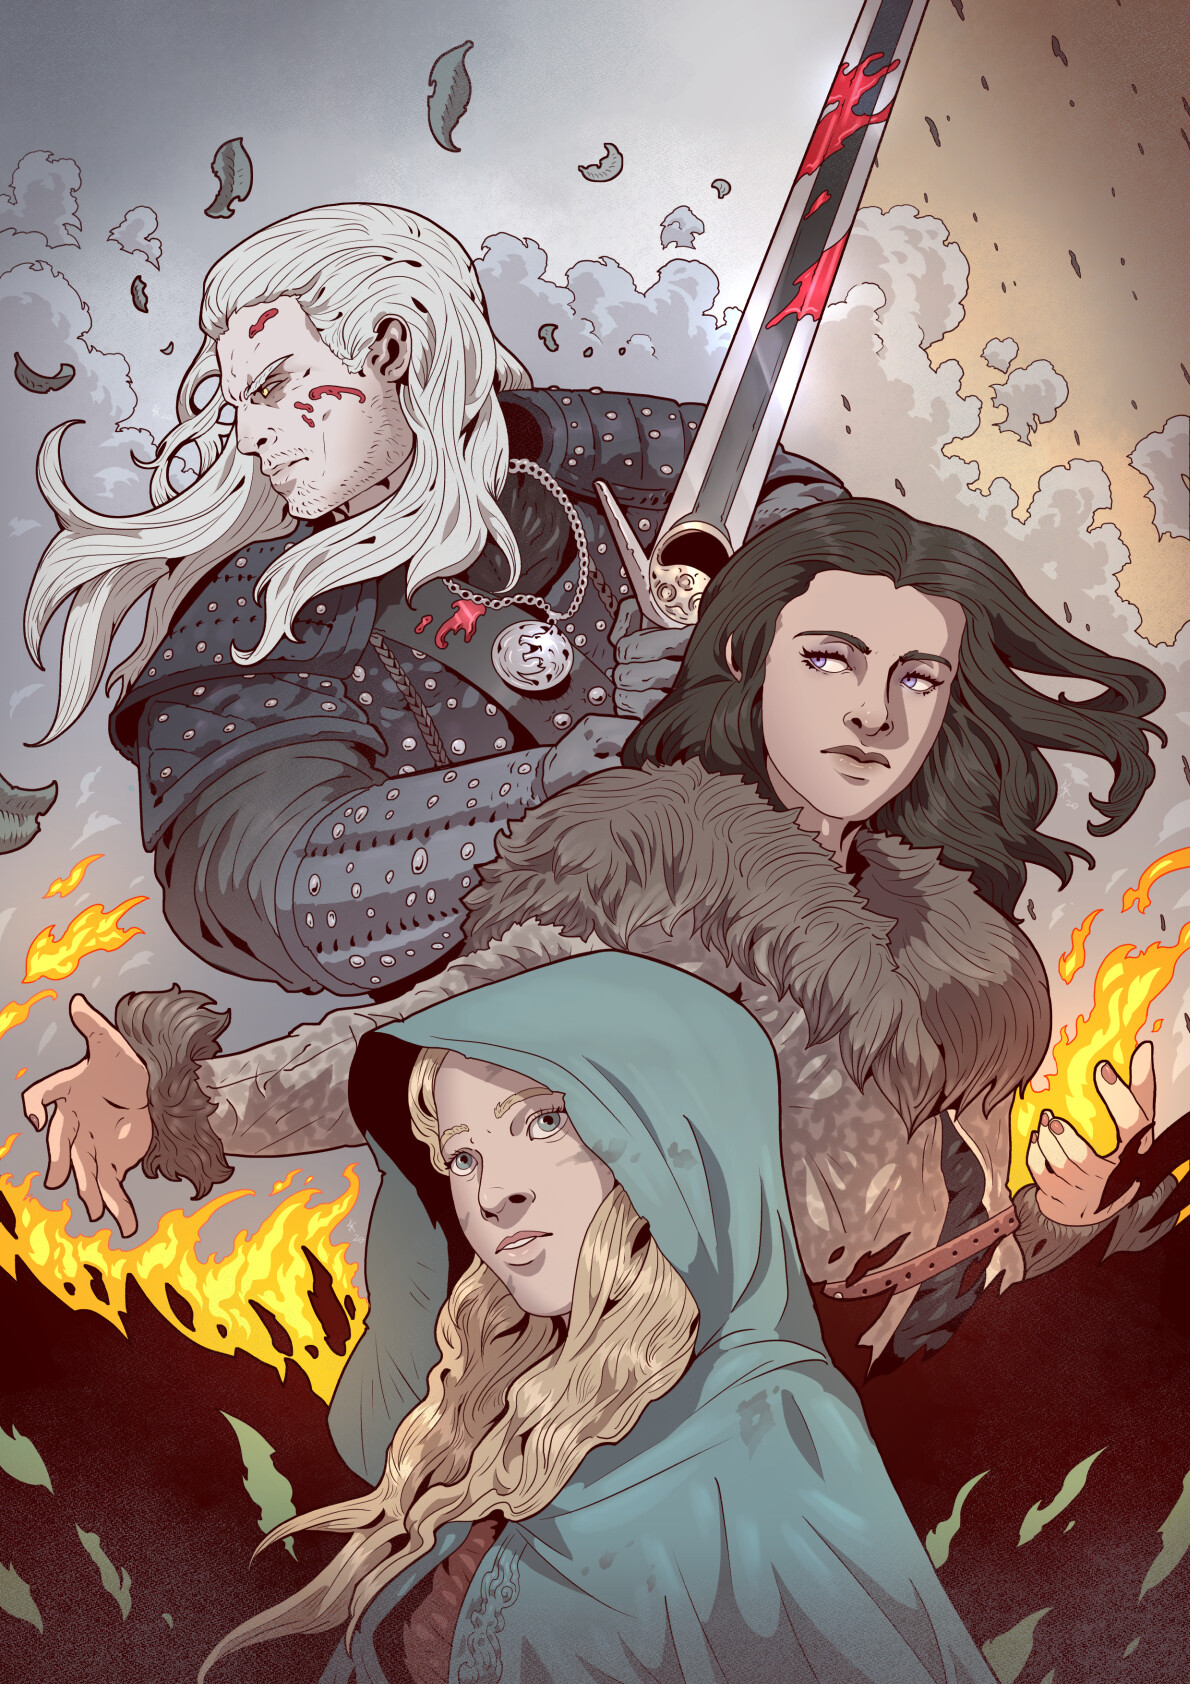 The Lion Cub, the Witch, and the Witcher by Sean Kyle Manaloto